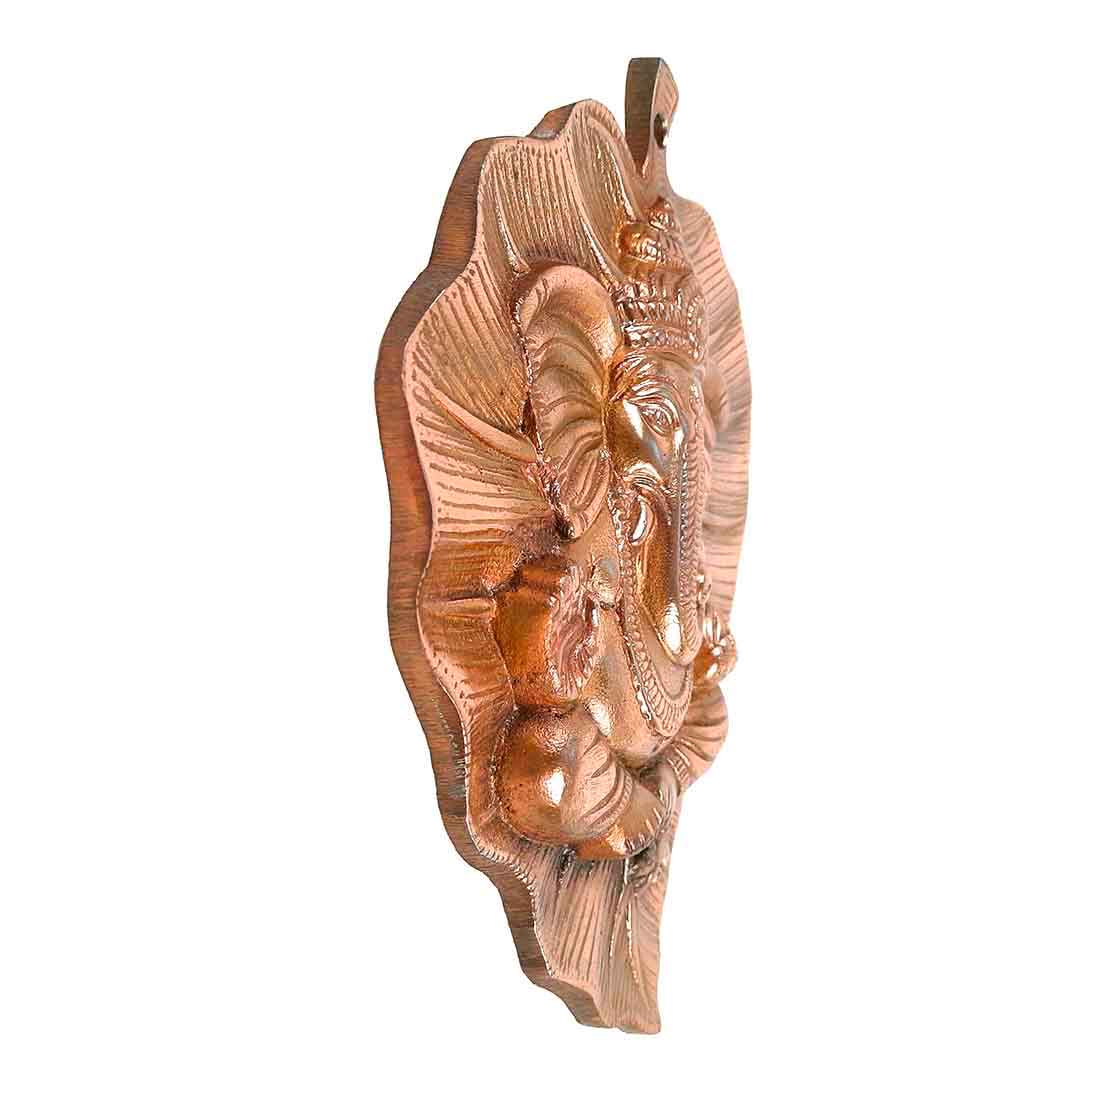 Ganesh Idol Wall Hanging | Lord Ganesha With Leaf Design Wall Statue Decor |Religoius & Spiritual Wall Art - For Puja, Home & Entrance  Living Room & Gift - 12 Inch